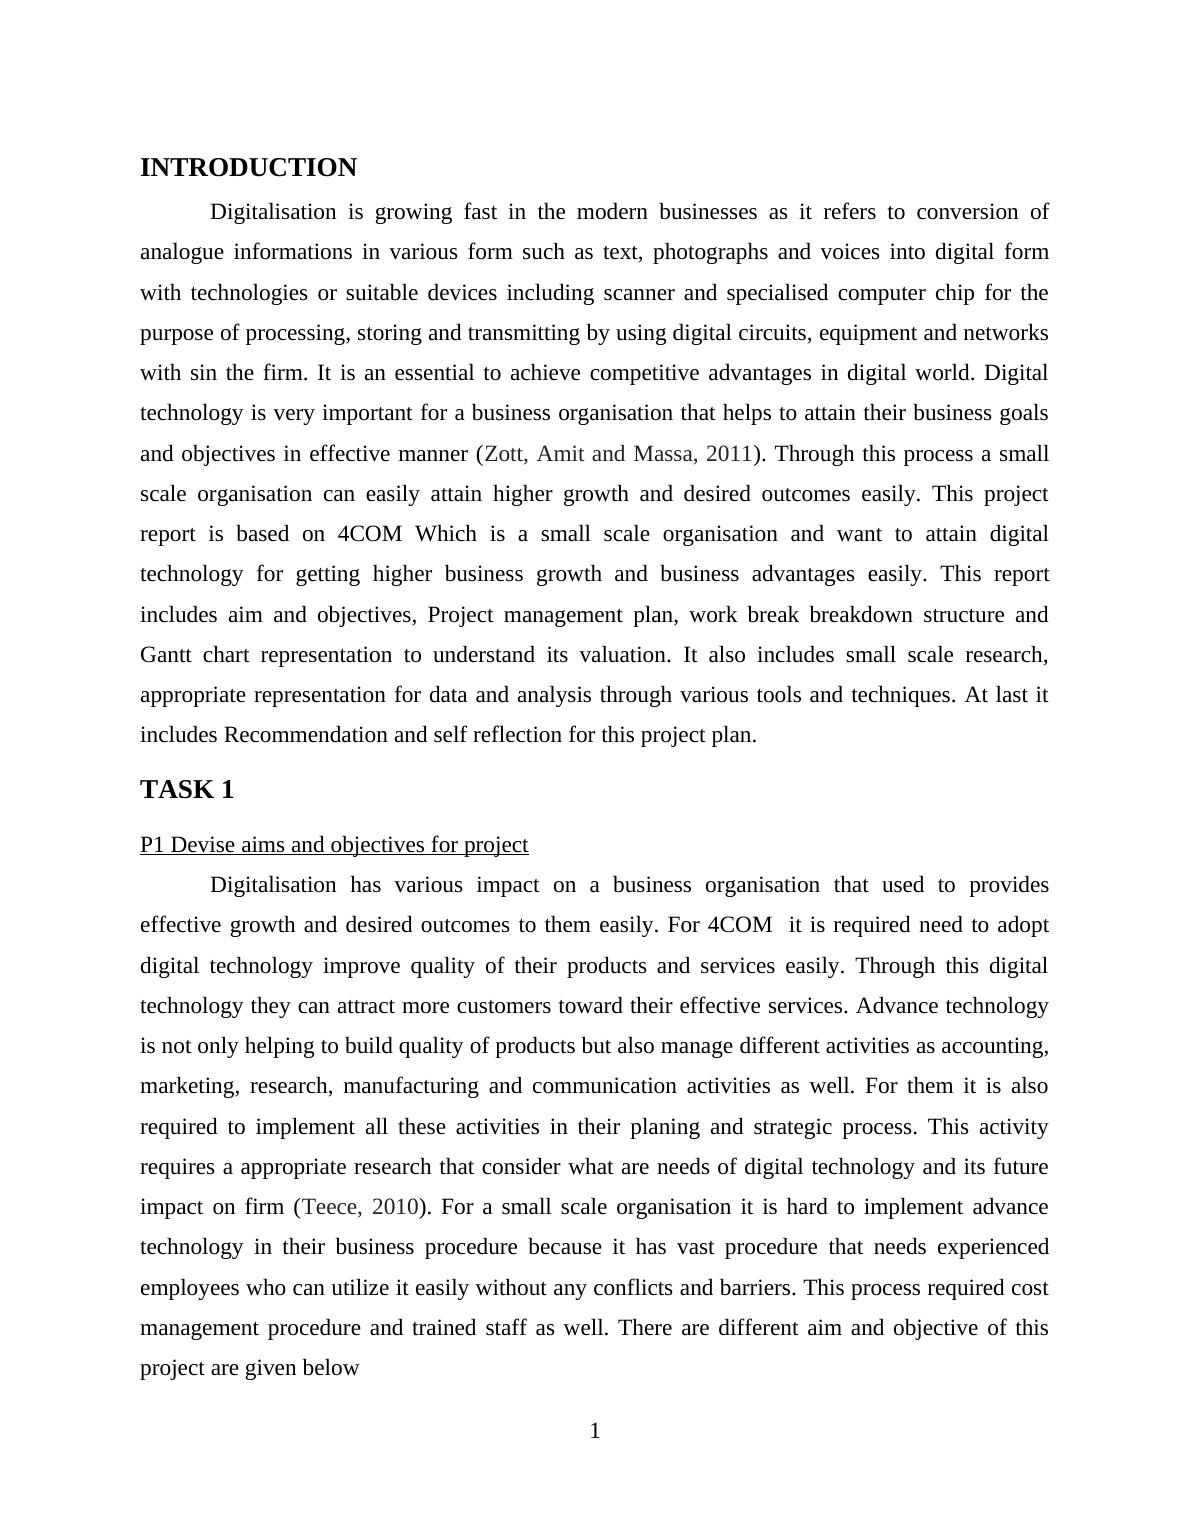 Project Report on Digital Technology for Business : 4COM Organisation_3